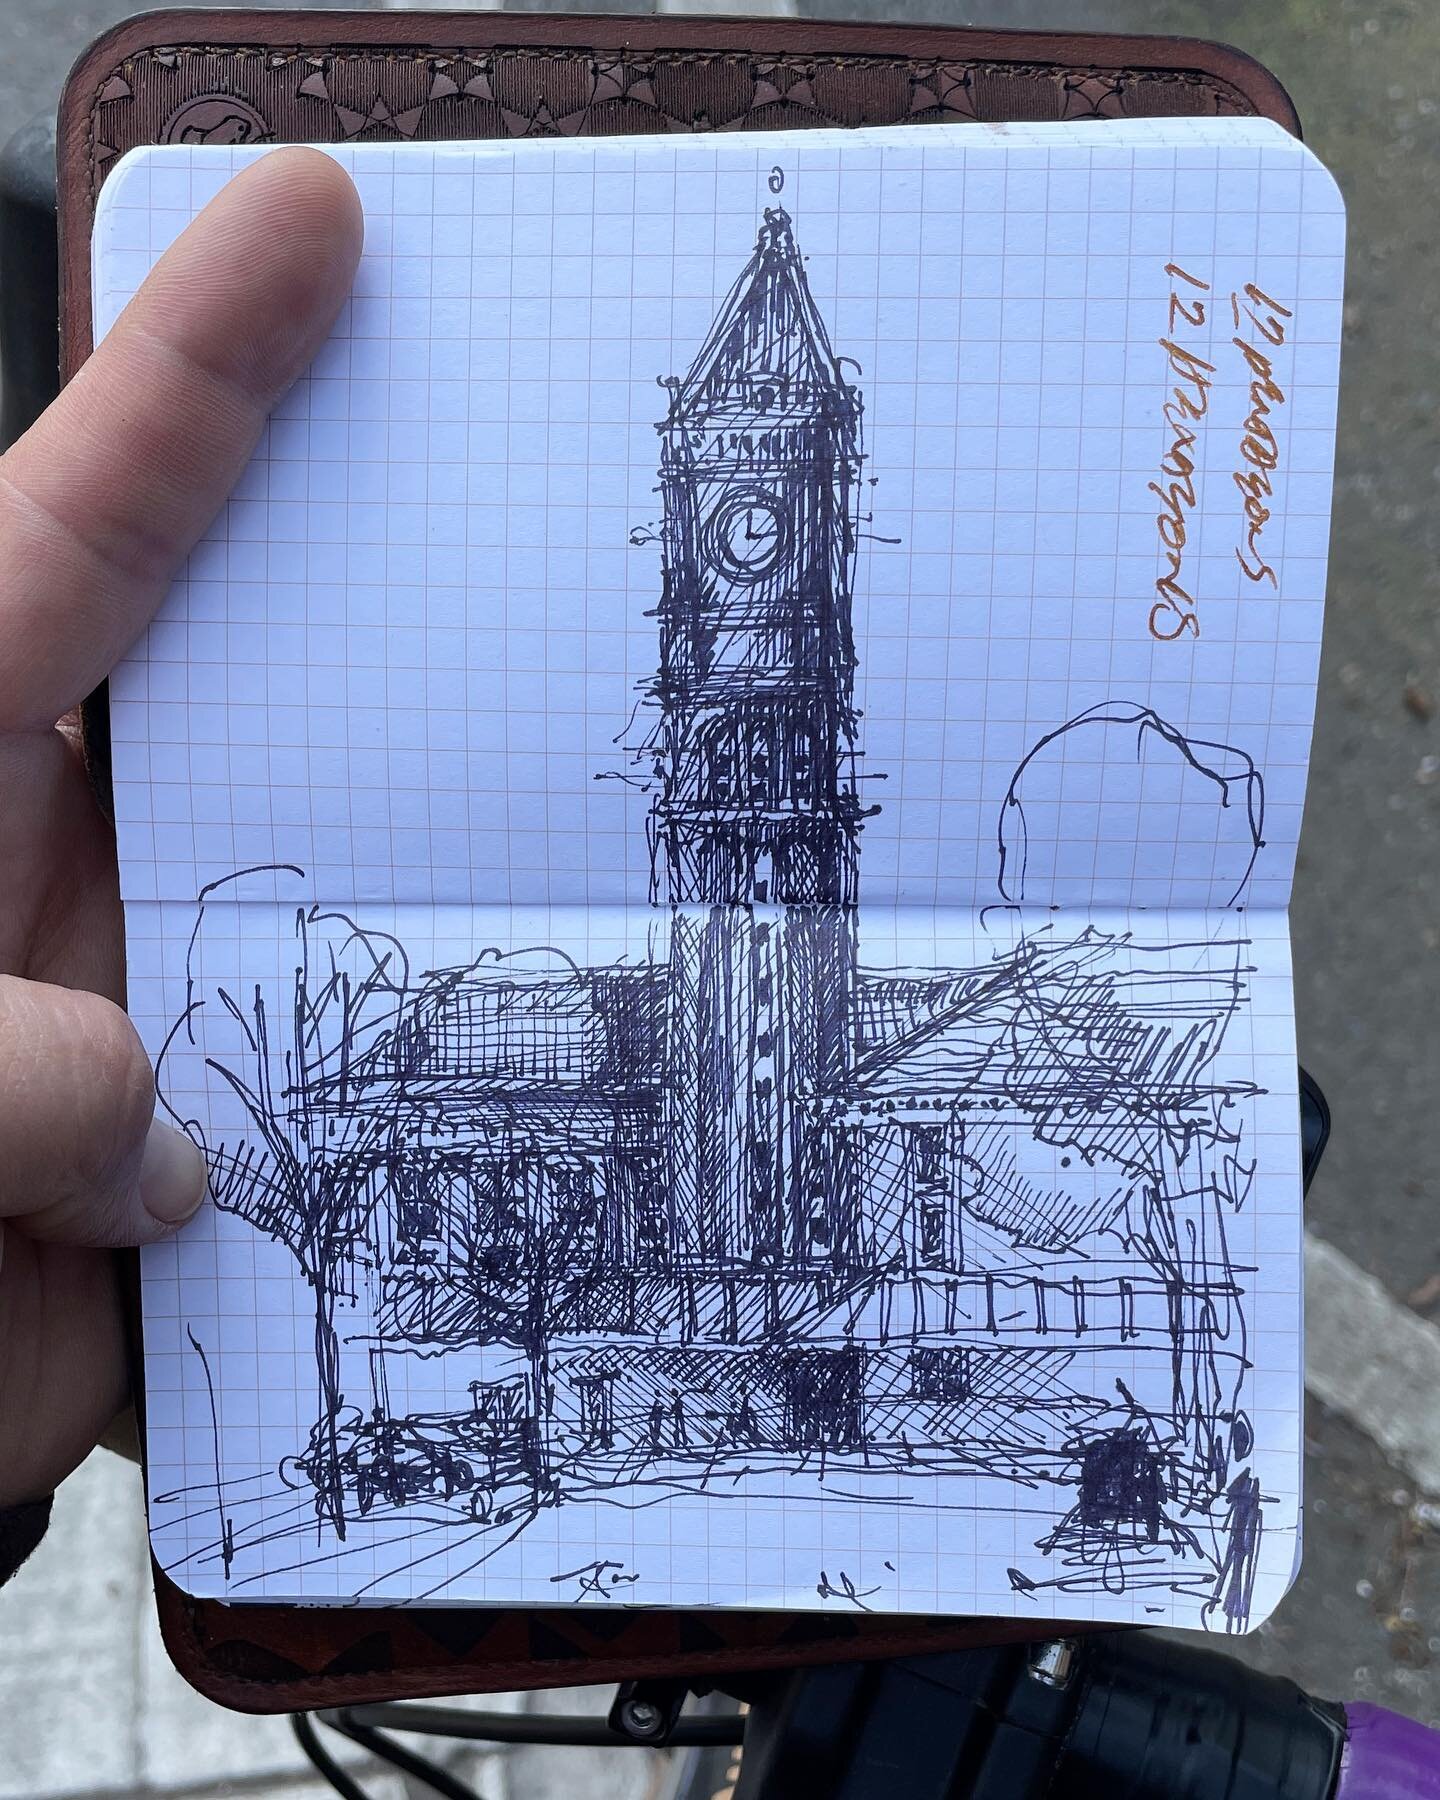 Bike downtown today, and sketched. Both good signs of a great weekend.